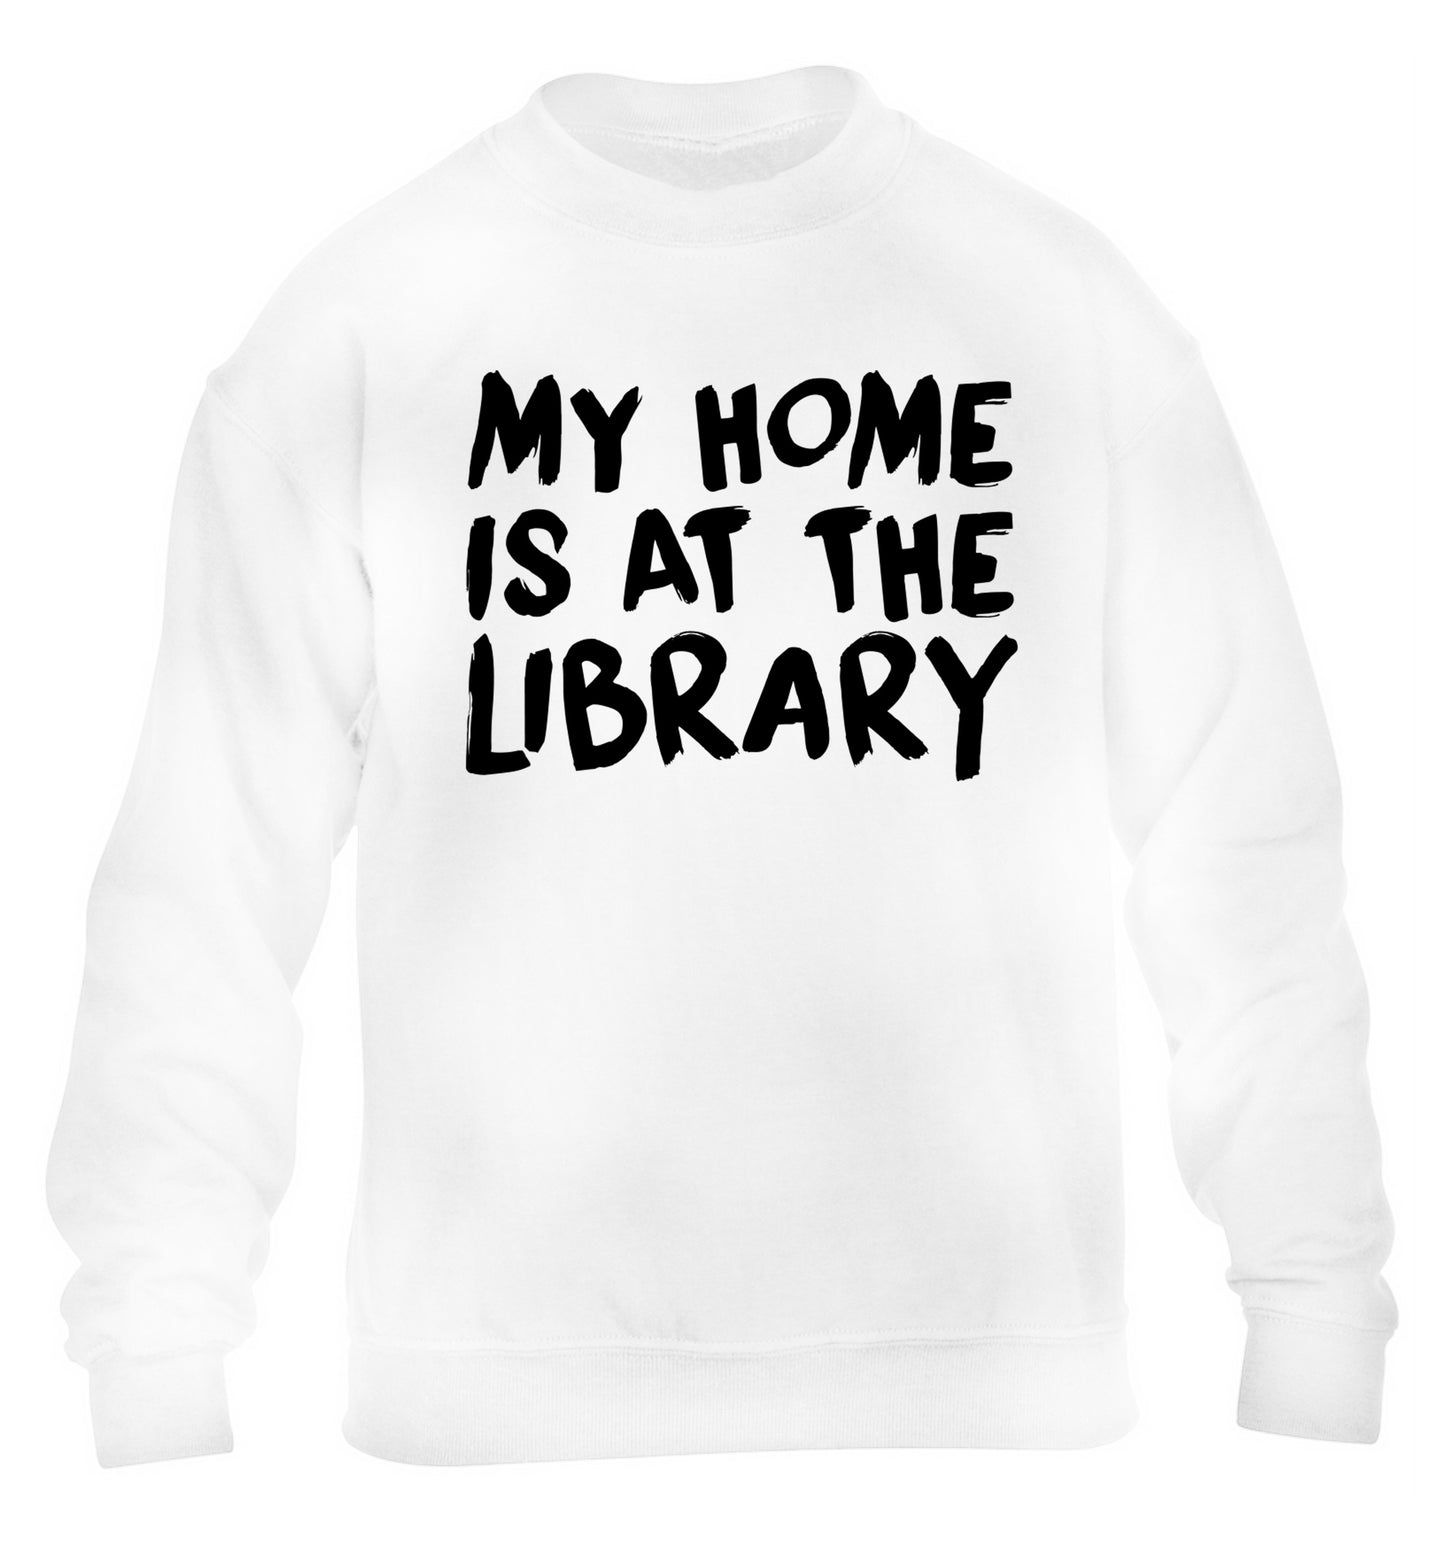 My home is at the library children's white sweater 12-14 Years